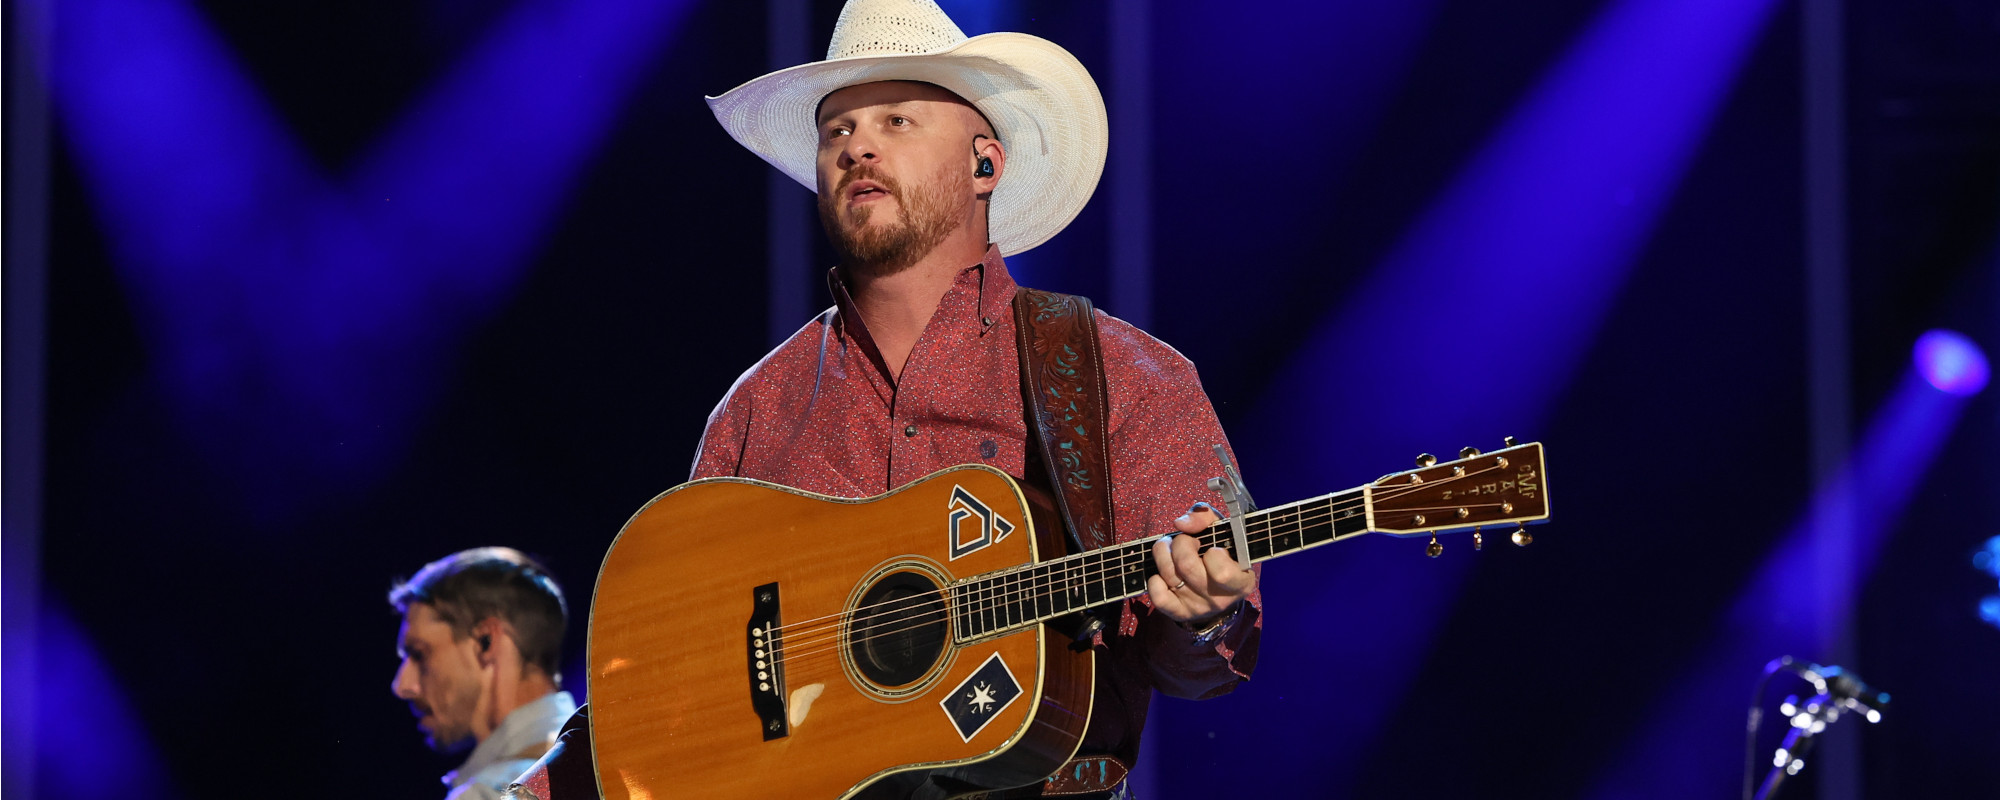 Cody Johnson Stops Show For a Fan in Distress: “This Is Not A Travis Scott Concert”